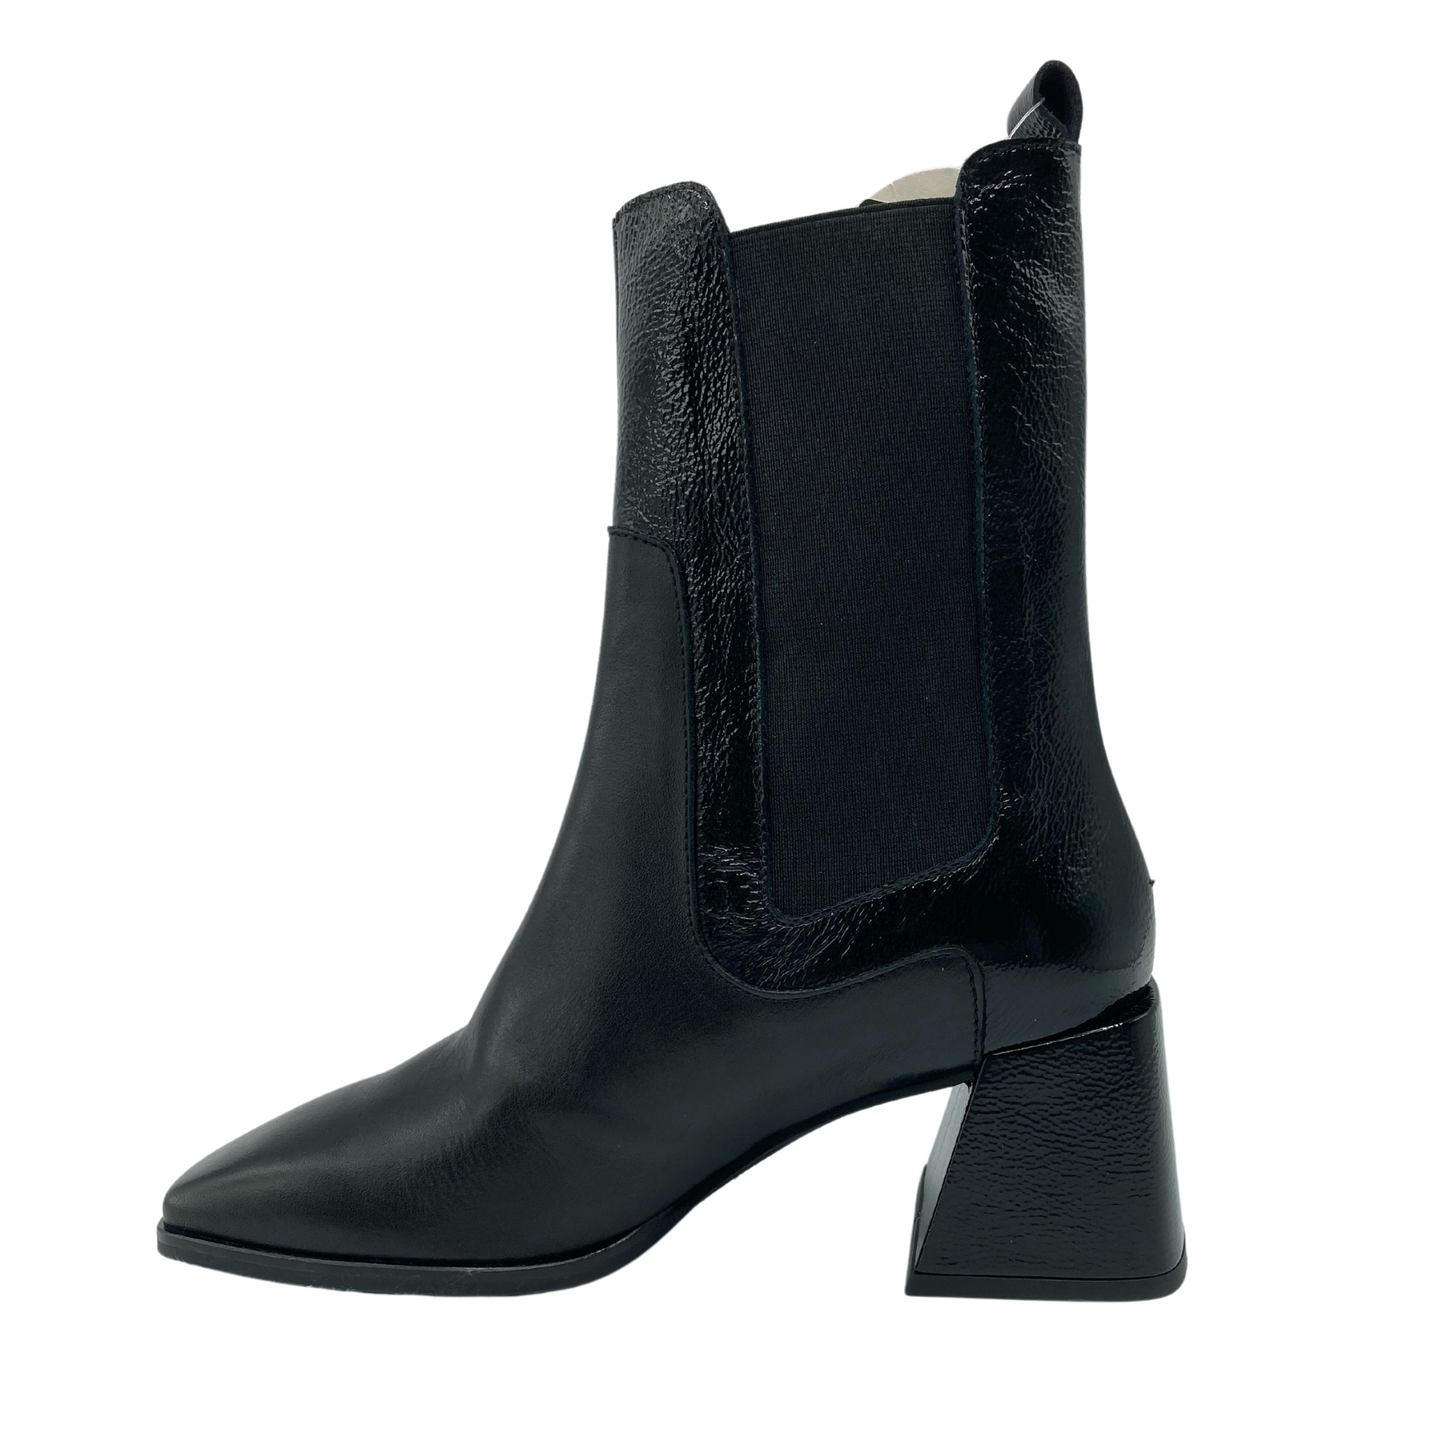 Left facing view of black leather short boot with leather wrapped flared heel and elastic side gores